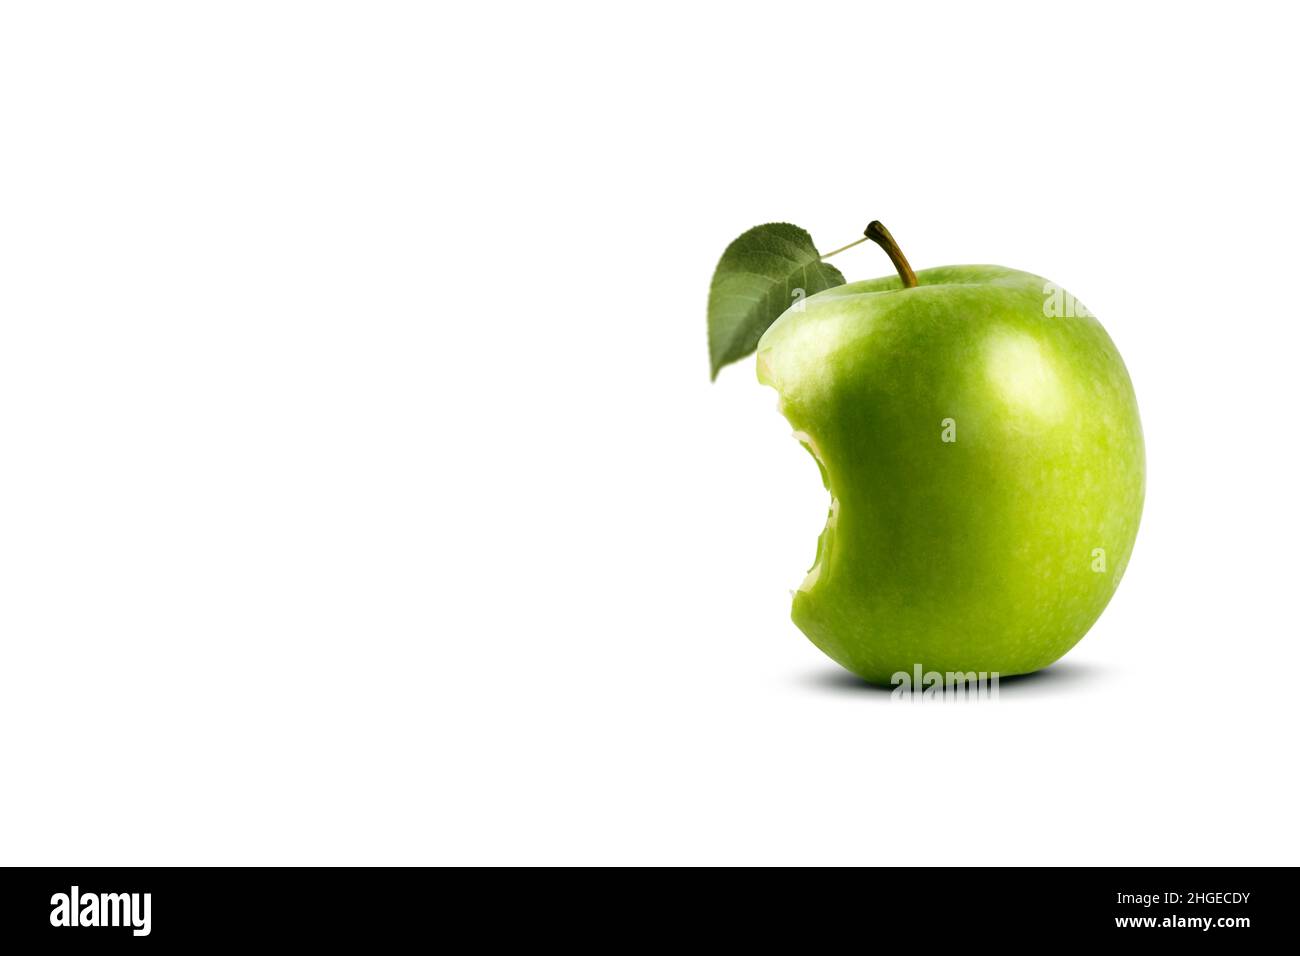 Bitten Granny Smith apple with a leaf on a white background. Stock Photo